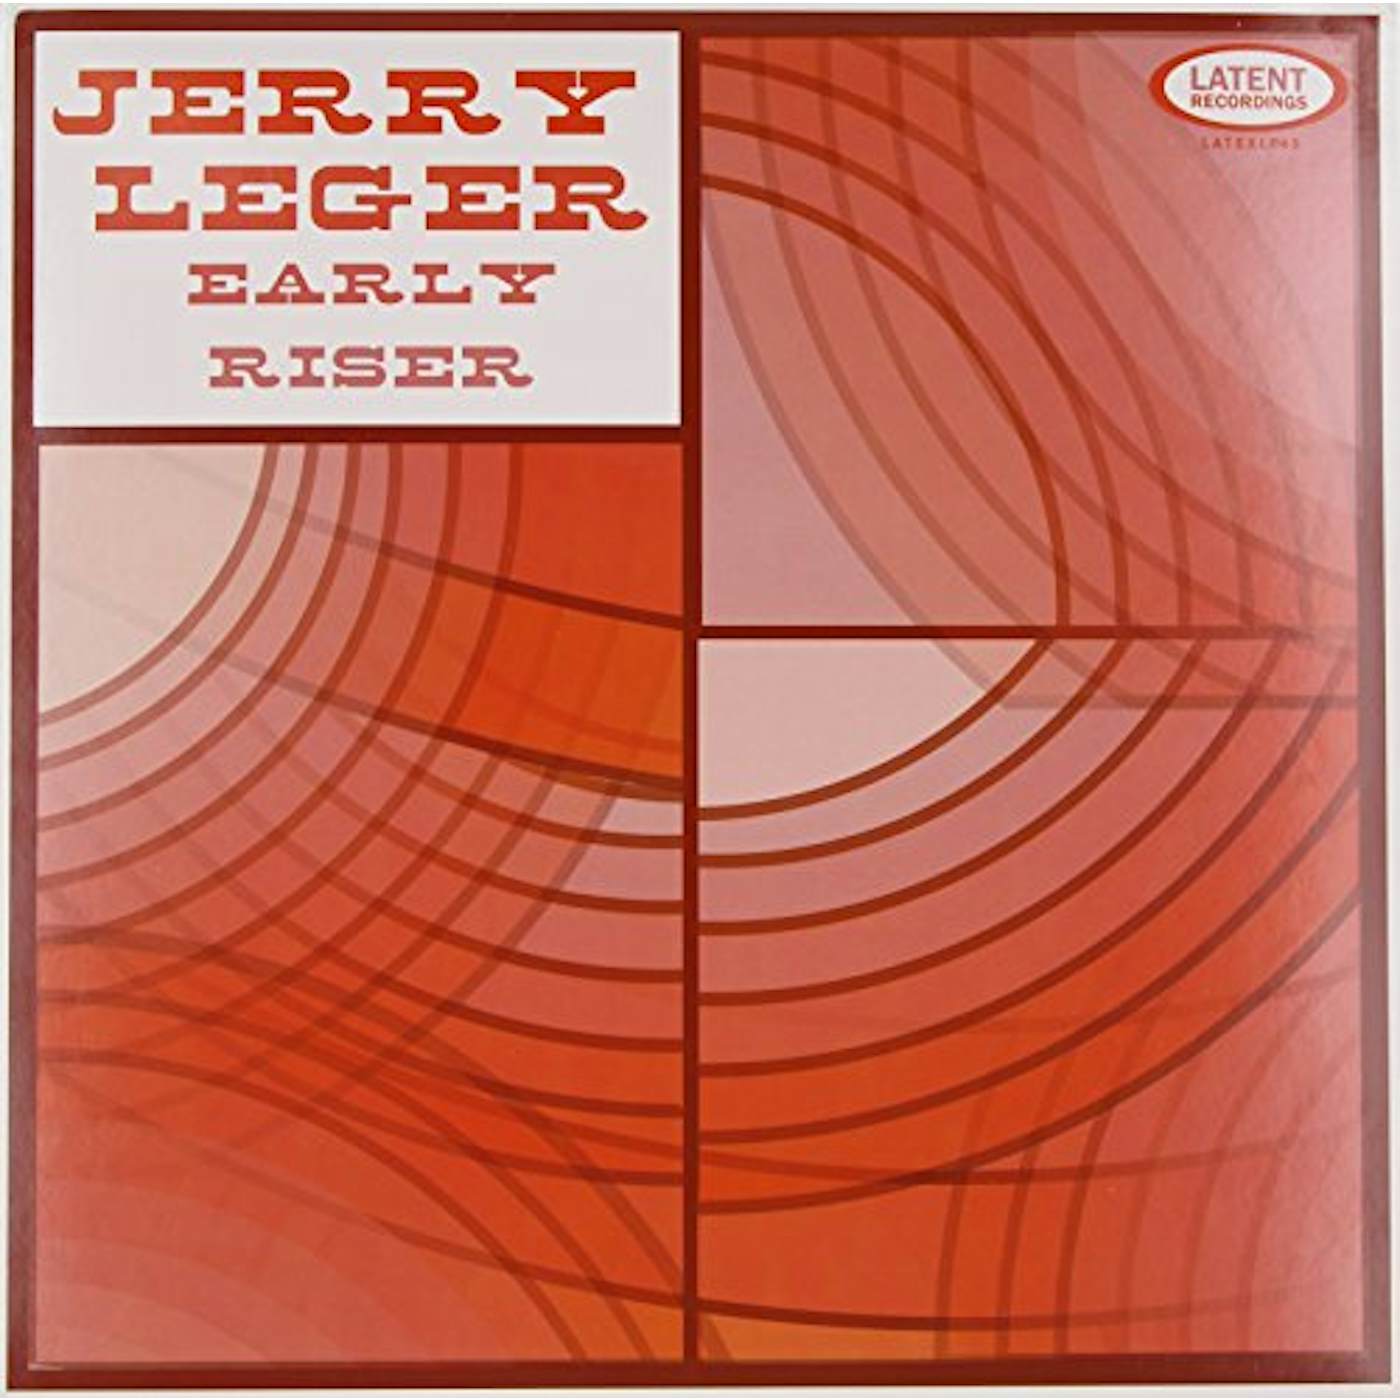 Jerry Leger EARLY RISER Vinyl Record - Canada Release